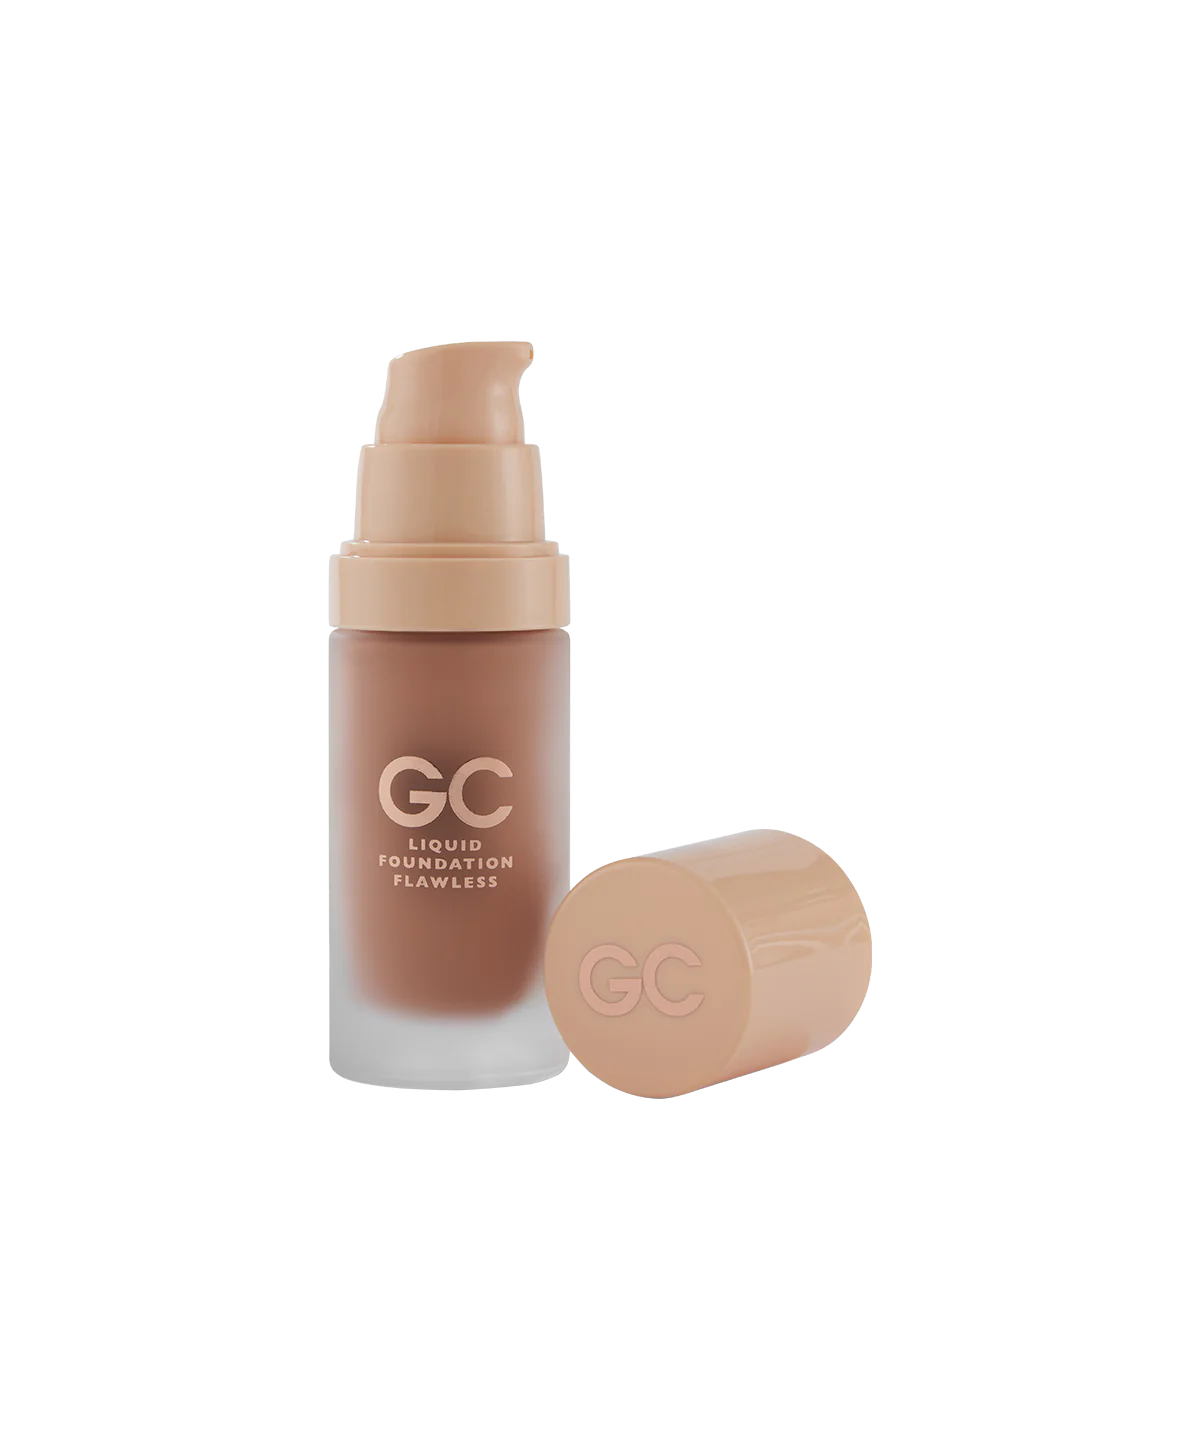 Gil Cagnè liquid foundation flawless cool amber